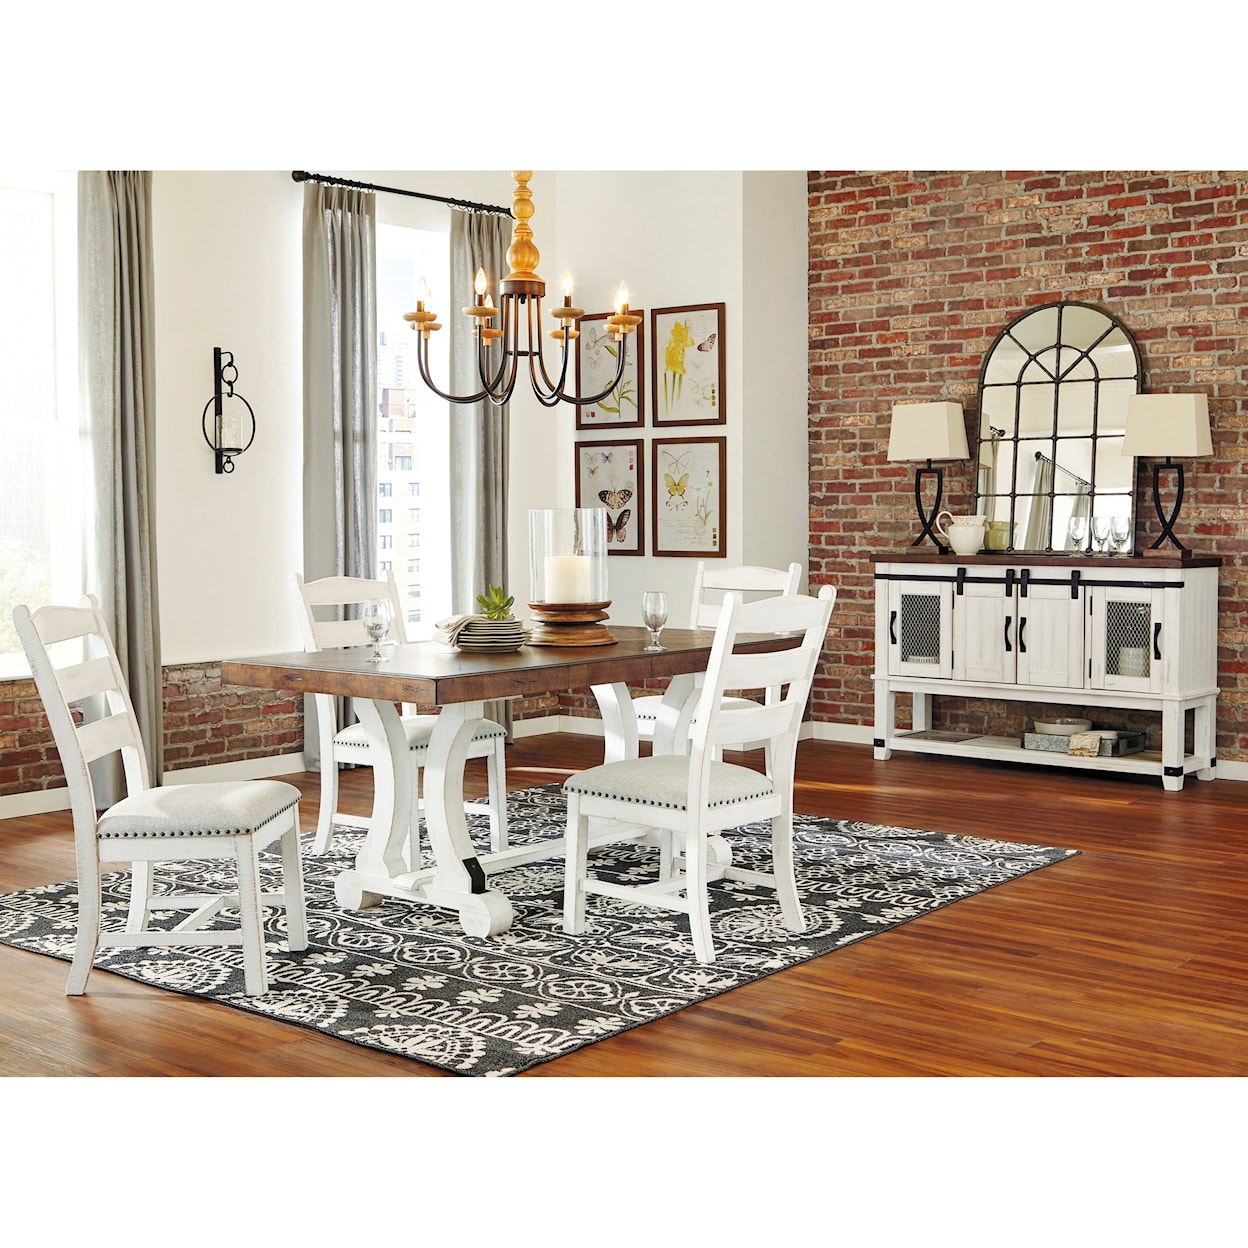 Ashley Furniture Signature Design Valebeck Casual Dining Room Group